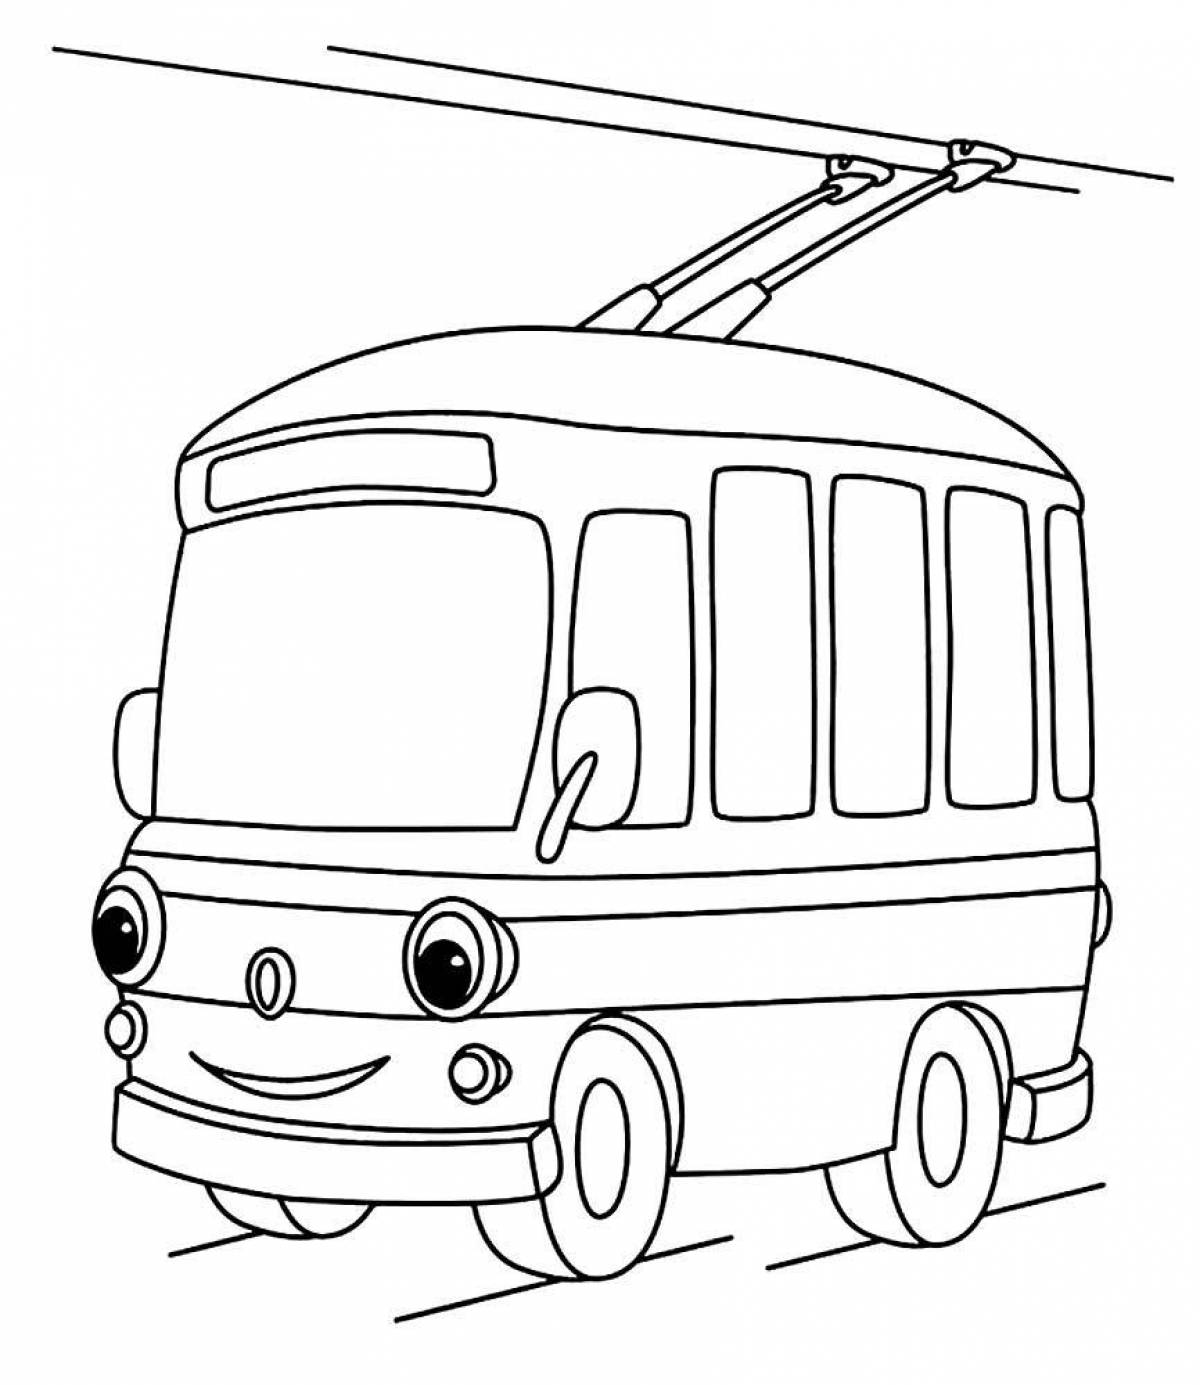 Cute transport coloring book for kids 5-6 years old